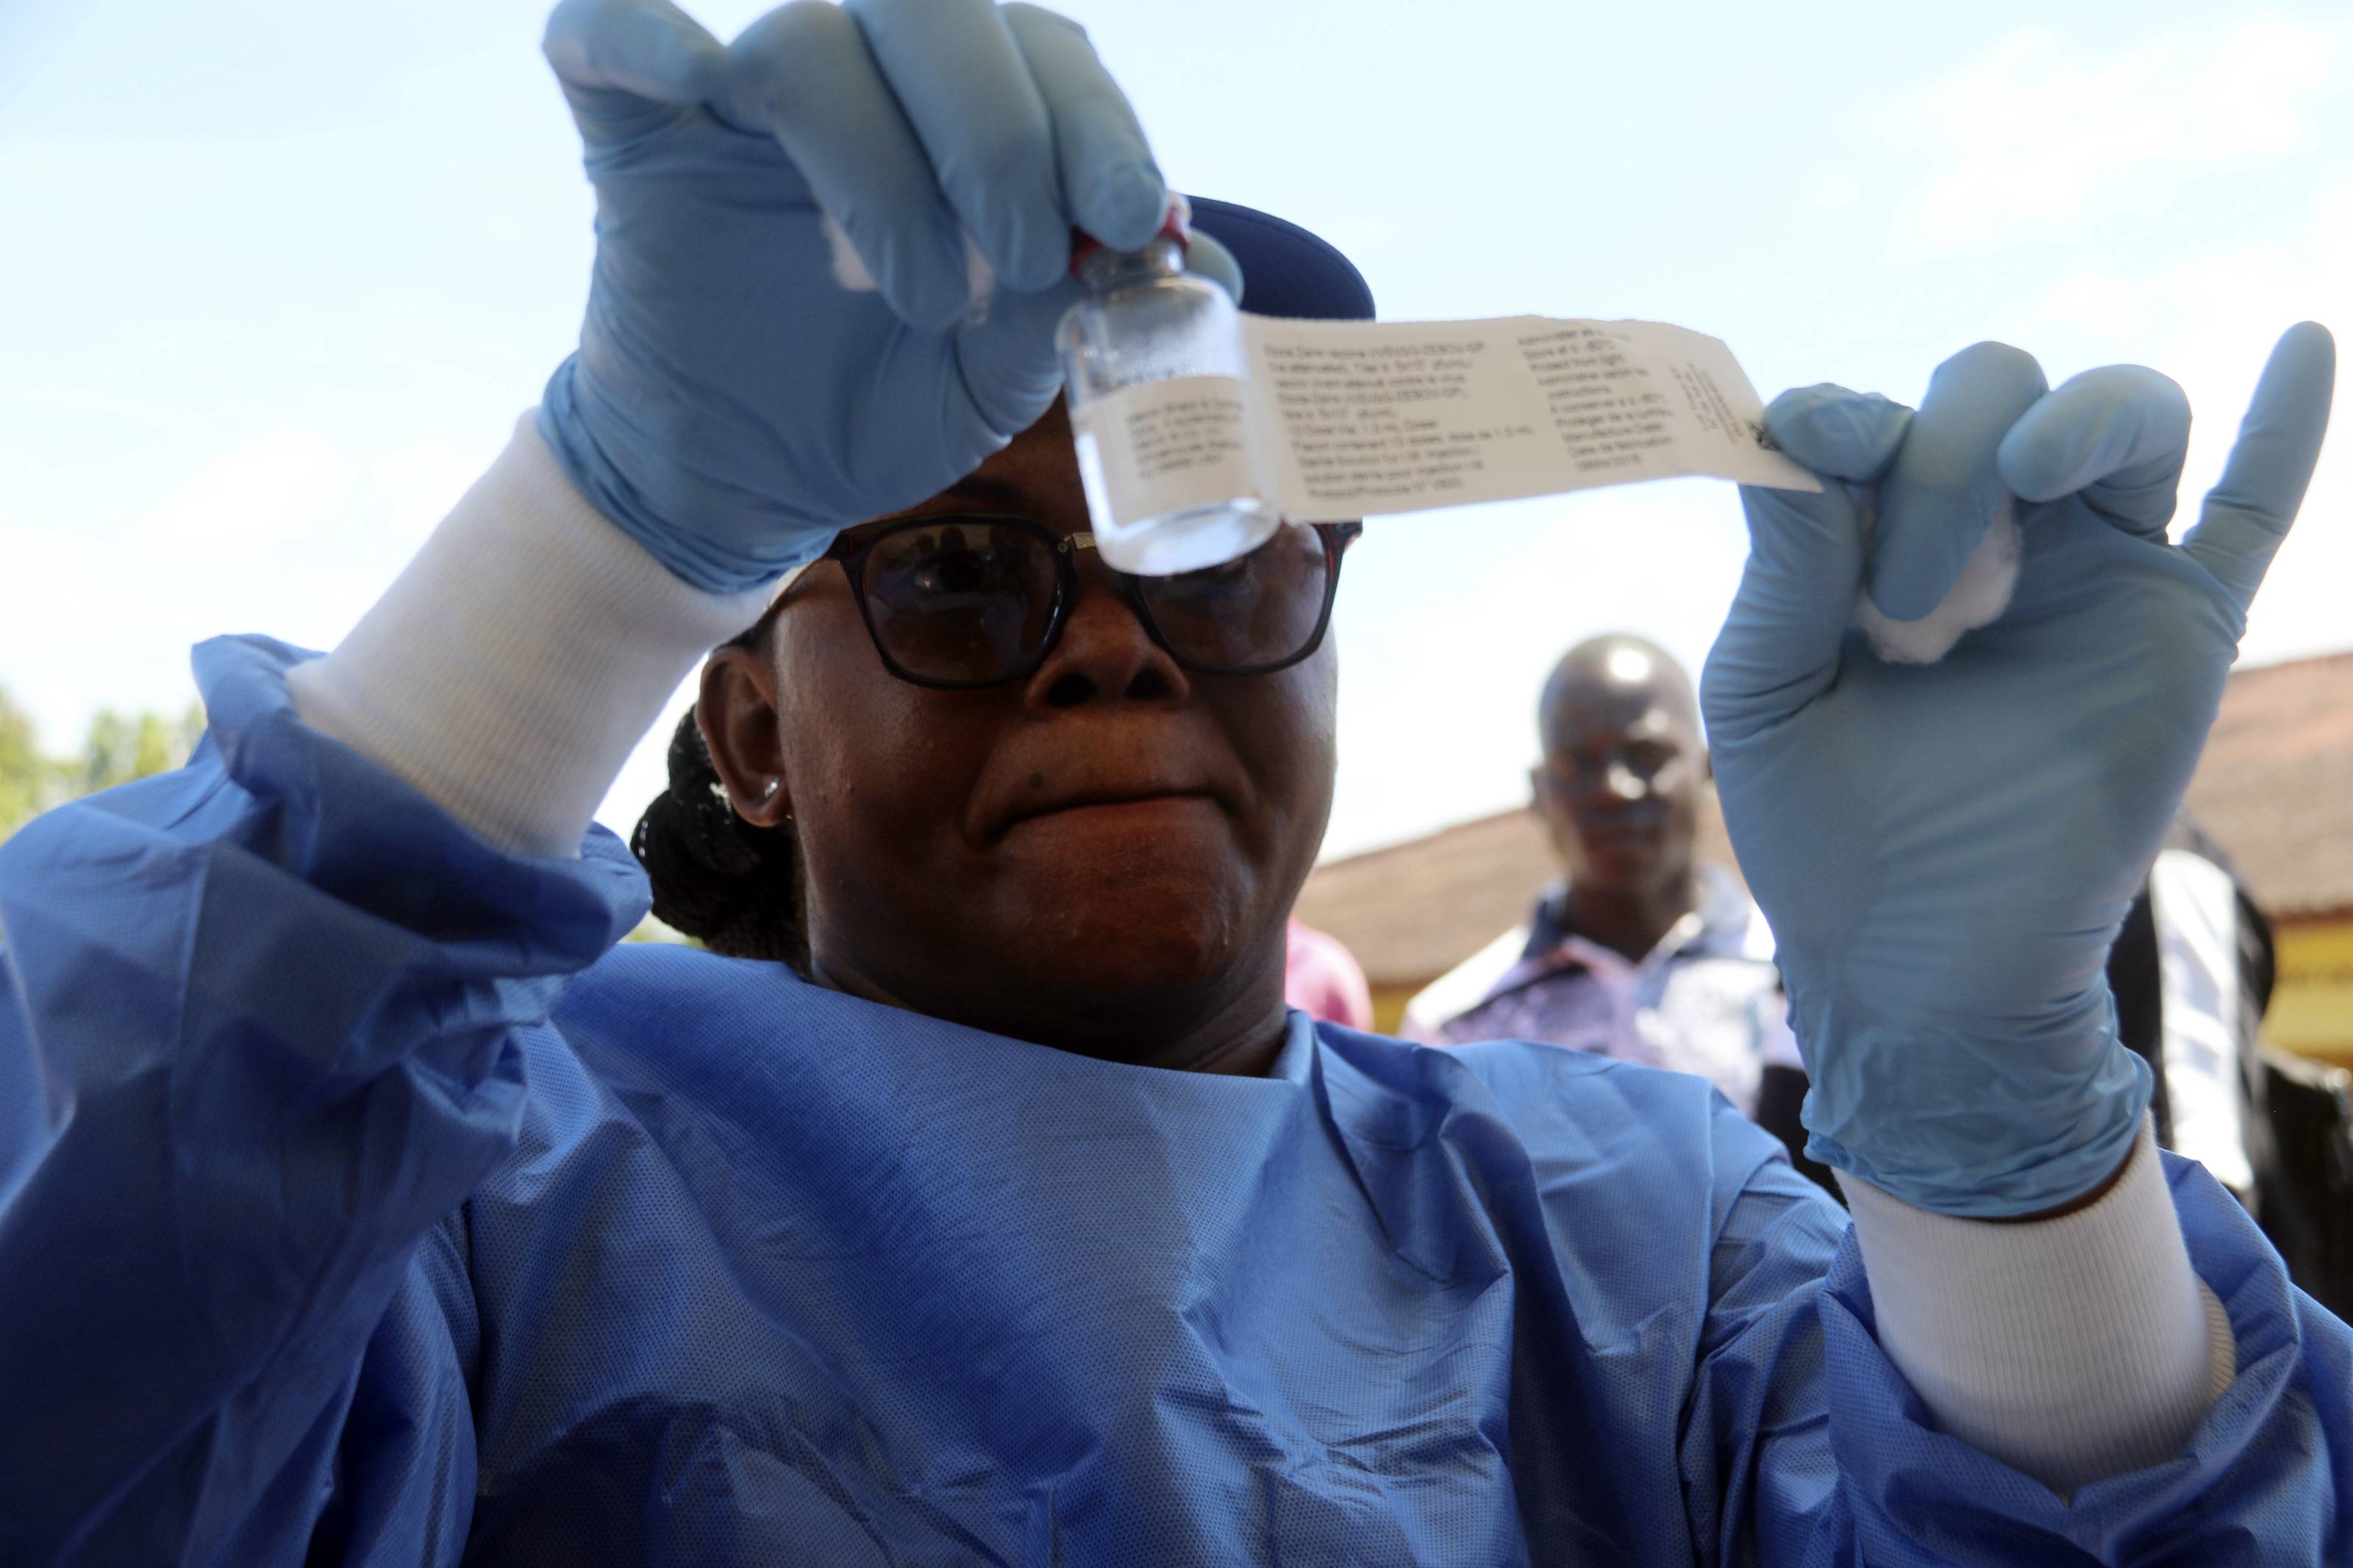 A health worker prepares an Ebola vaccine to administer to health workers during a vaccination campaign in Mbandaka, Congo Monday, May. 21, 2018. Congo's health minister says a nurse has died from Ebola in Bikoro, the rural northwestern town where the outbreak began, as the country begins a vaccination campaign. (AP Photo/John Bompengo), added: 2018-05-24